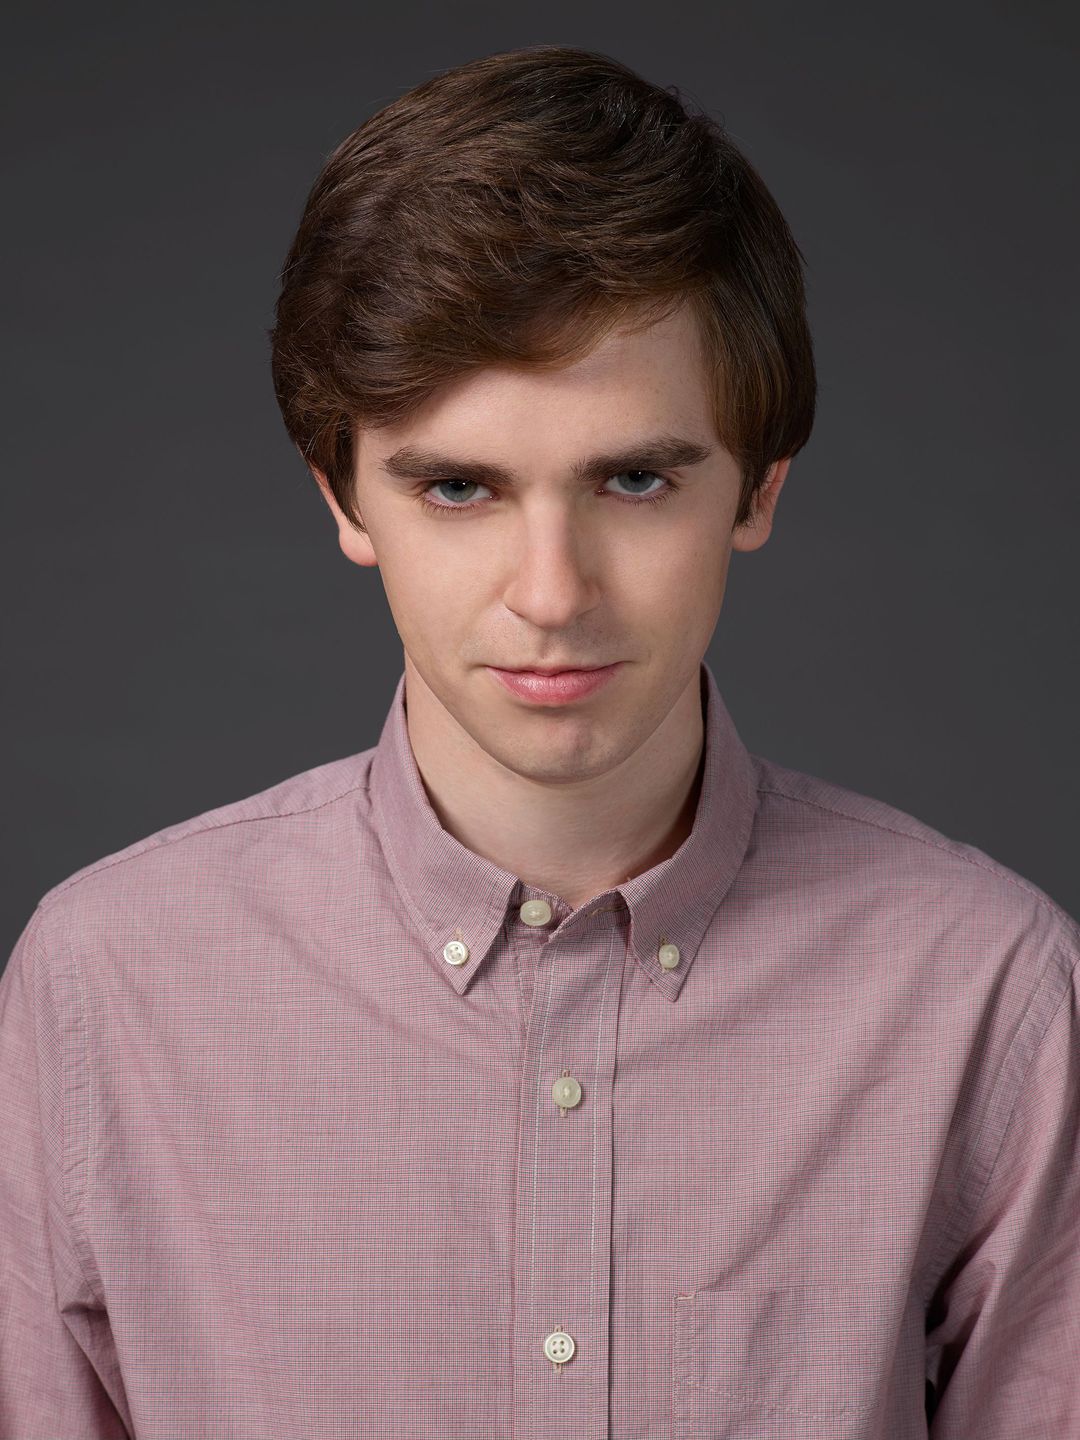 Freddie Highmore where is he now